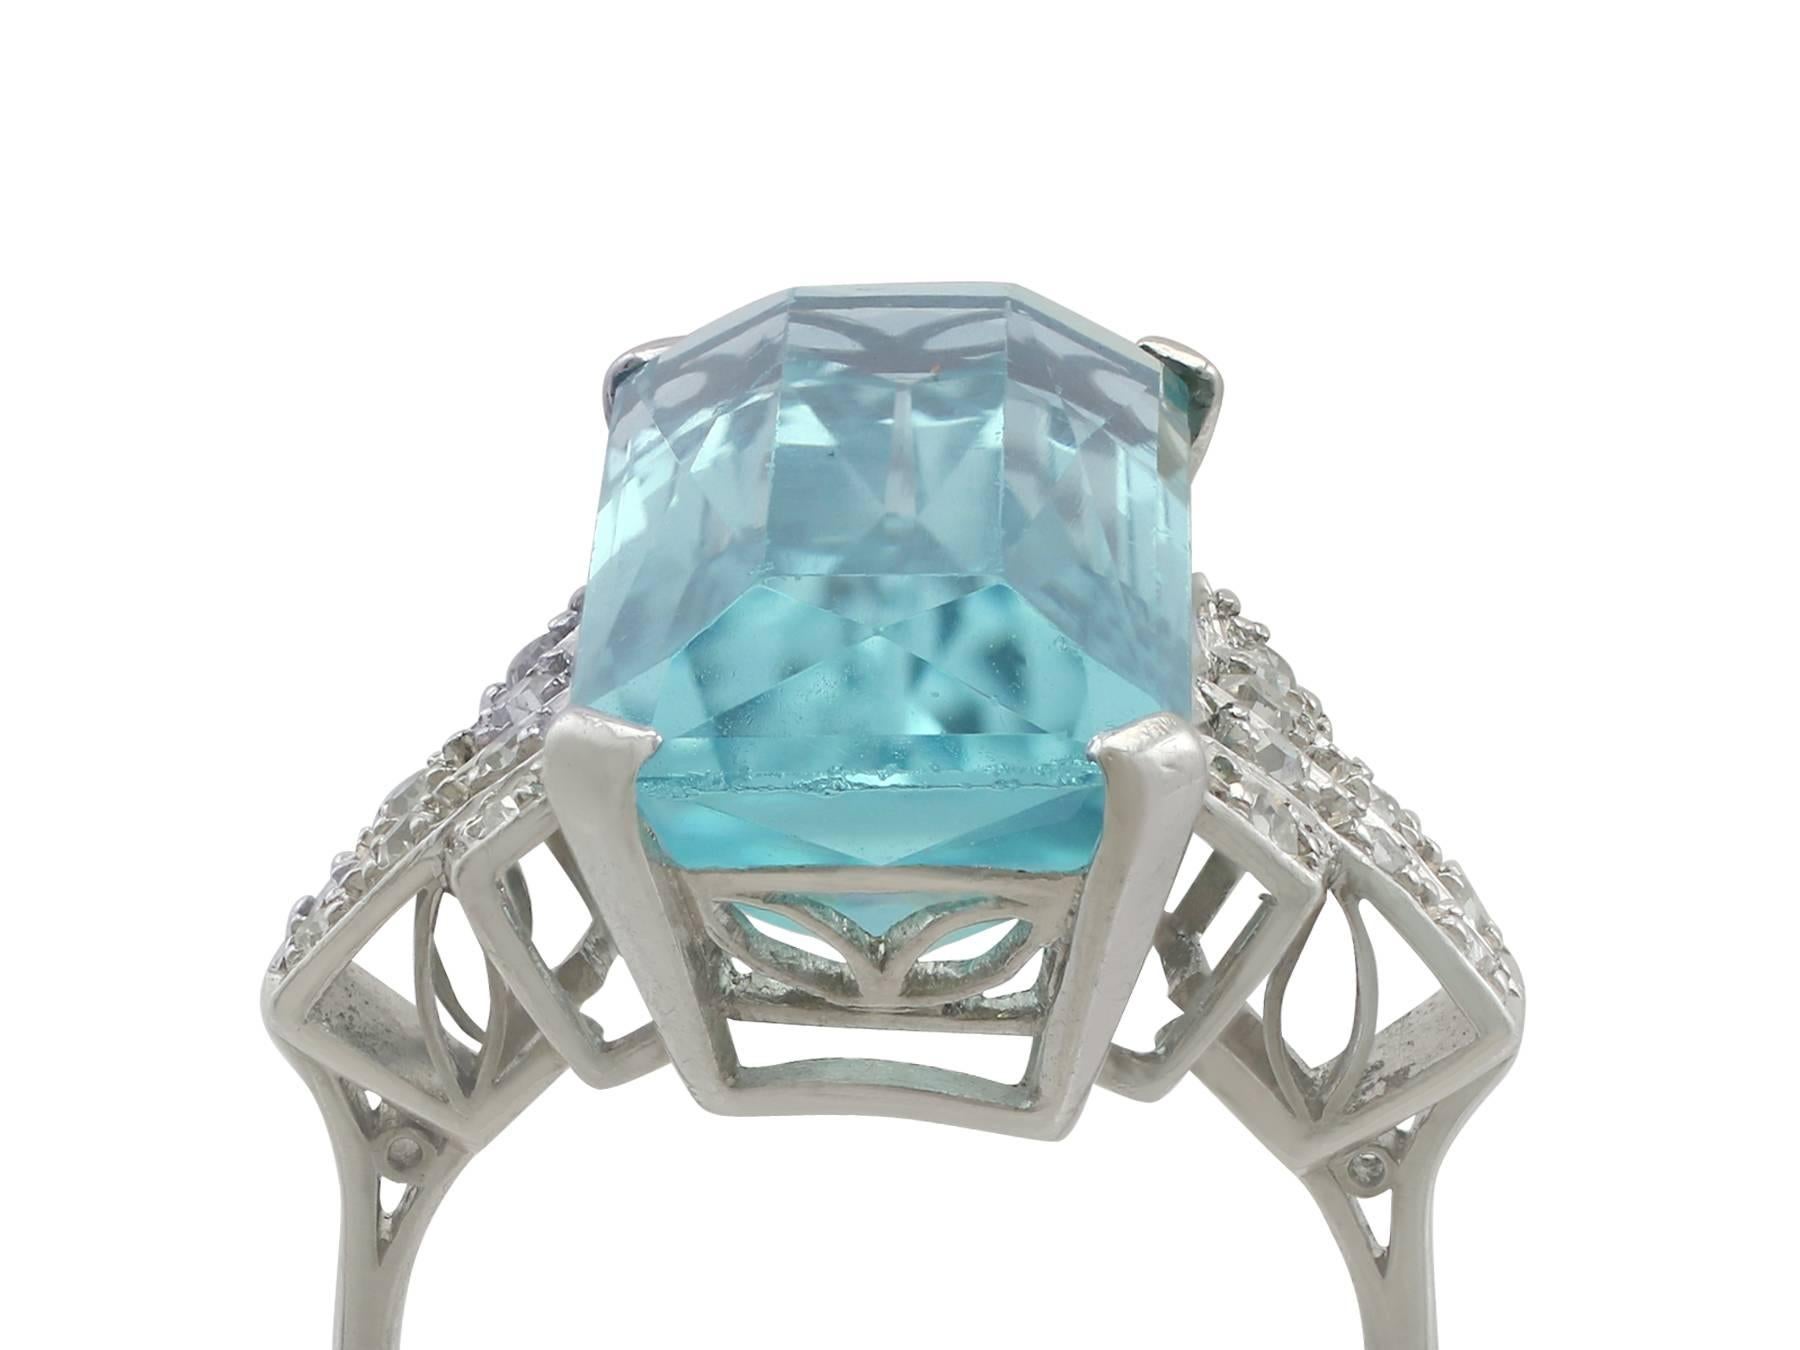 A stunning Art Deco 11.25 carat aquamarine and 0.18 carat diamond, platinum cocktail ring; part of our diverse antique jewelry and estate jewelry collections

This stunning, fine and impressive aquamarine cocktail ring has been crafted in